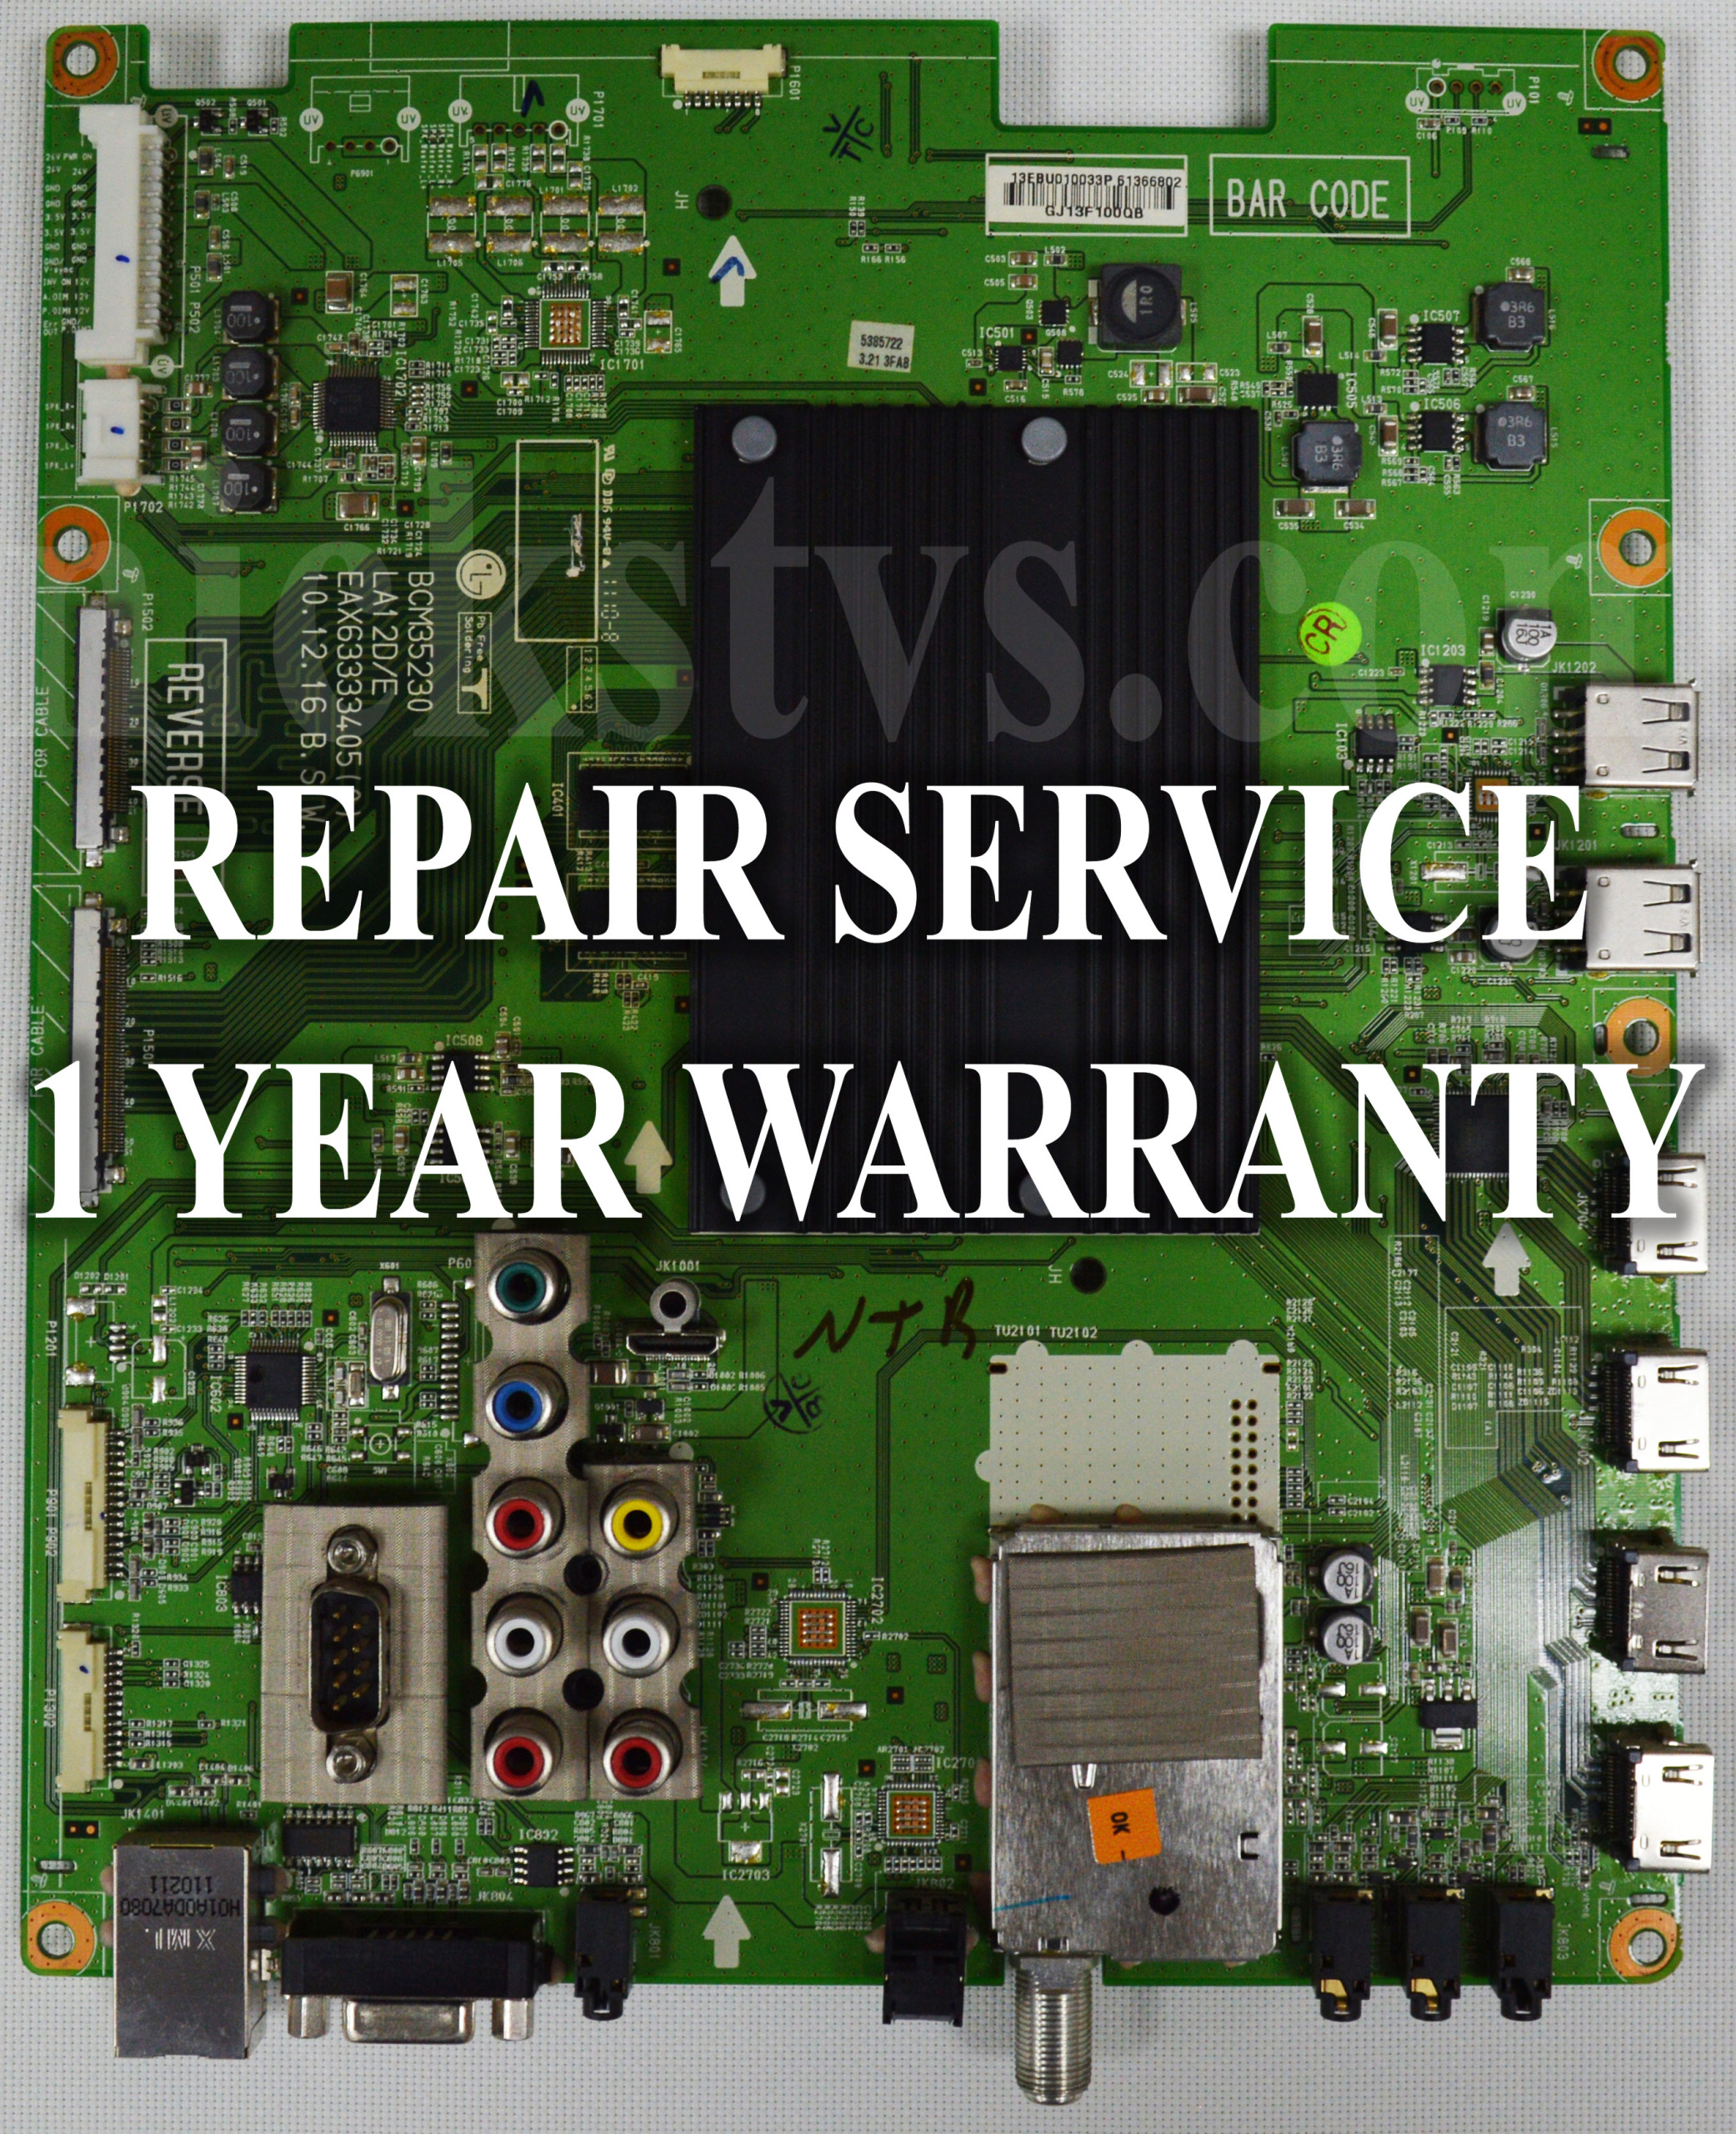 Mail-in Repair Service LG 47LV5400 MAINBOARD 